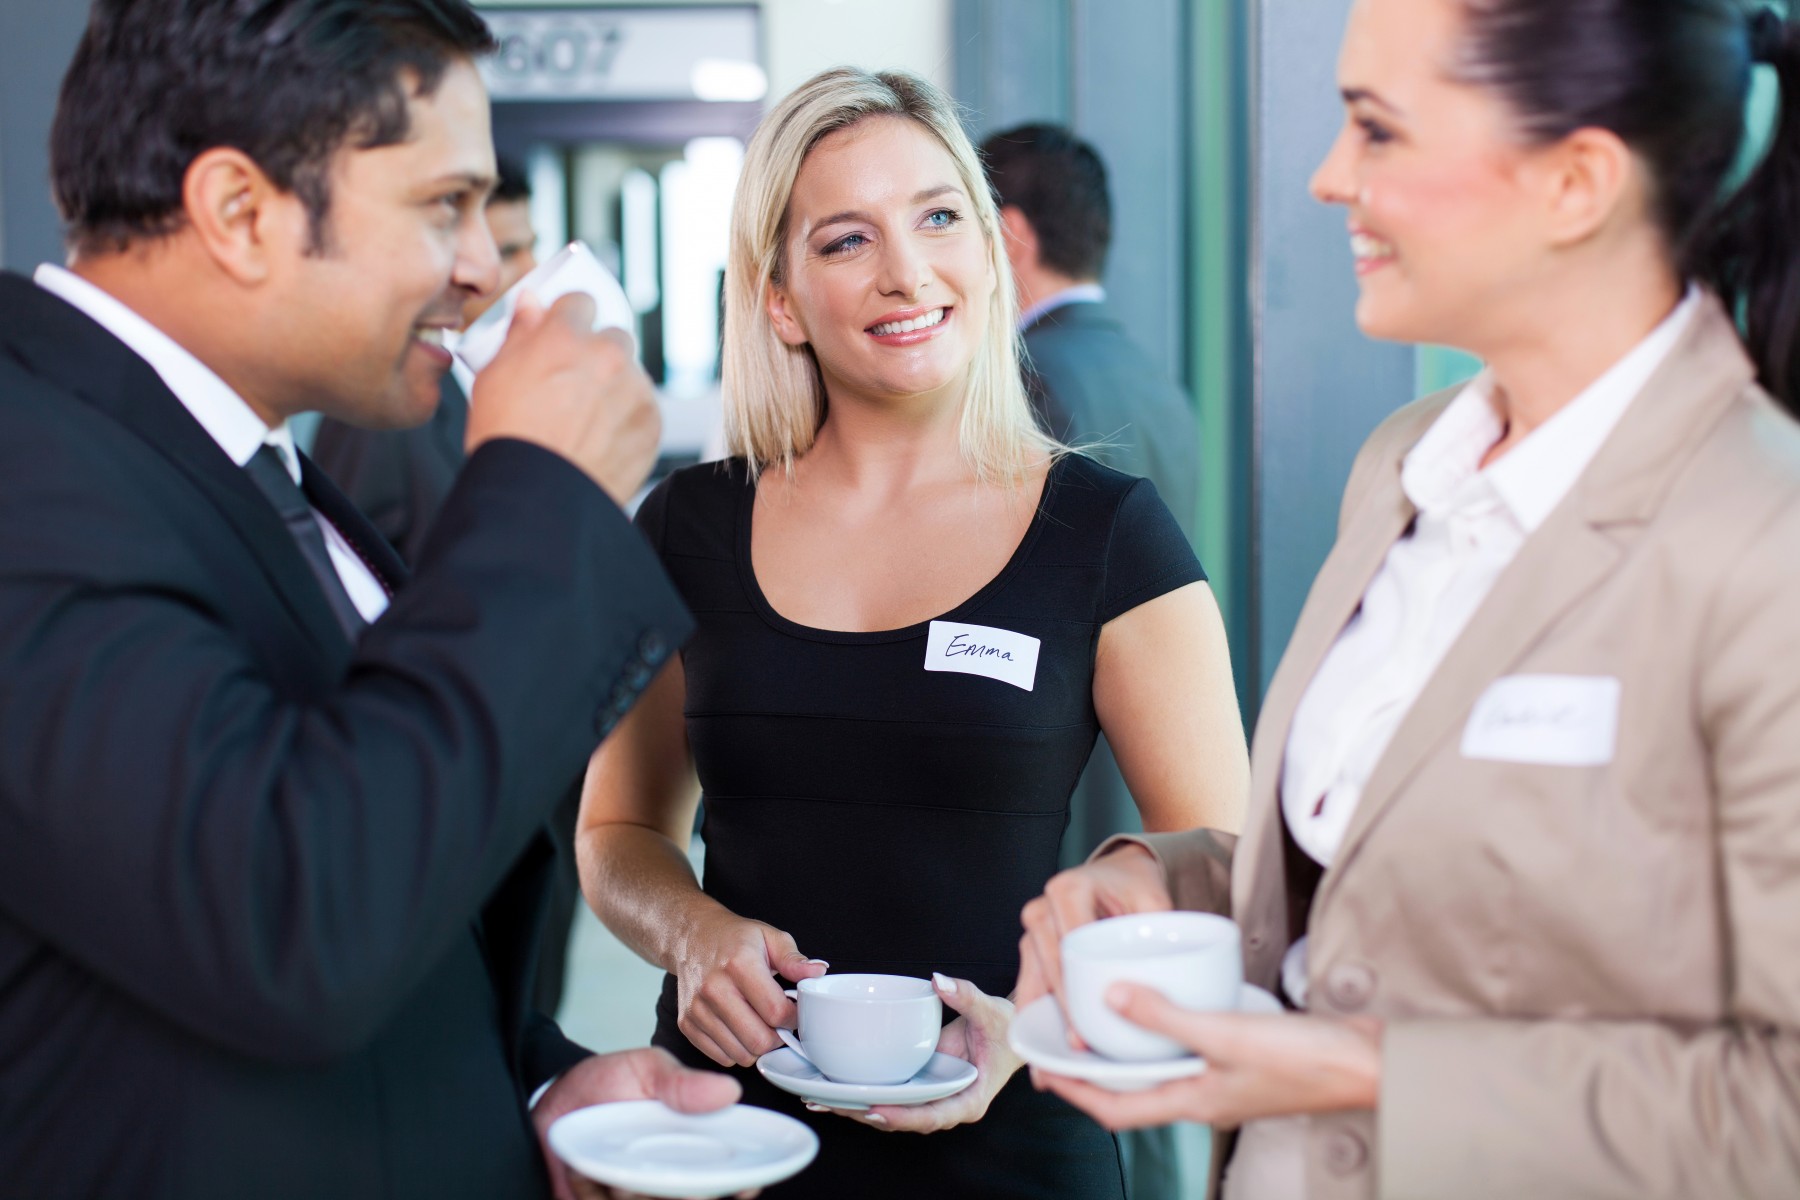 Corporate events: the importance of networking